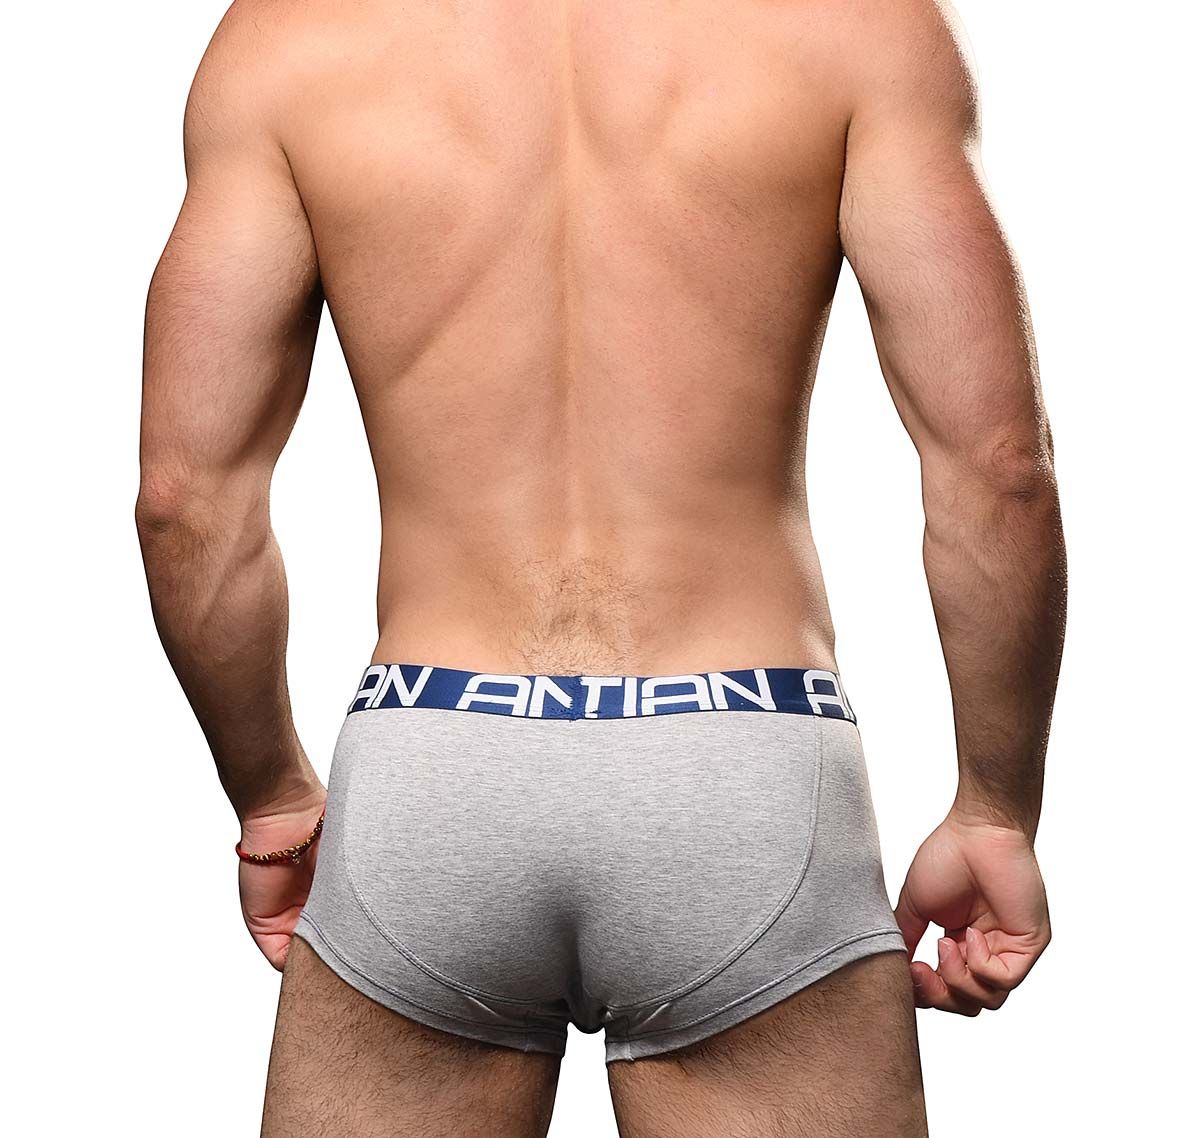 Andrew Christian Boxers COOLFLEX MODAL TAGLESS Boxer w/ Show-it 93025, grey